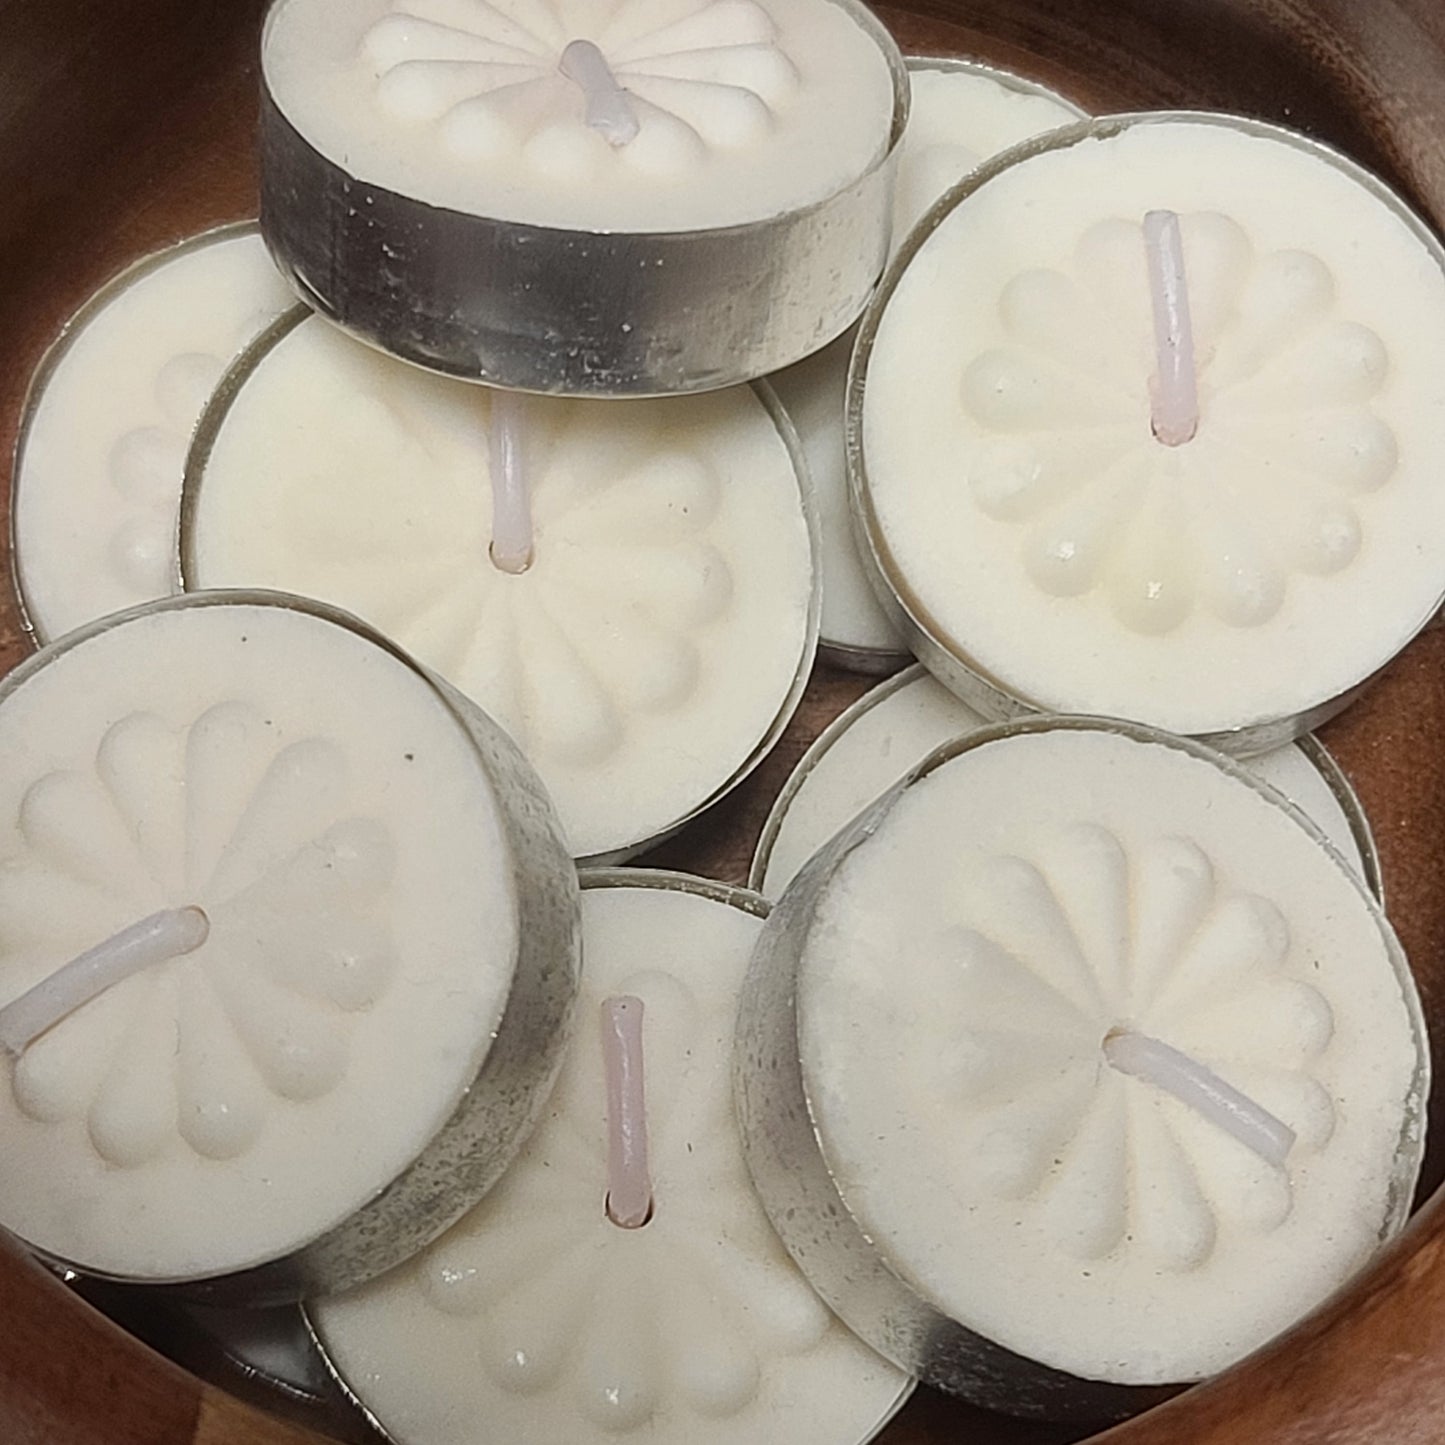 WHITE Tealight for all purposes, spirituality, truth, divination, purification, grounding, balancing